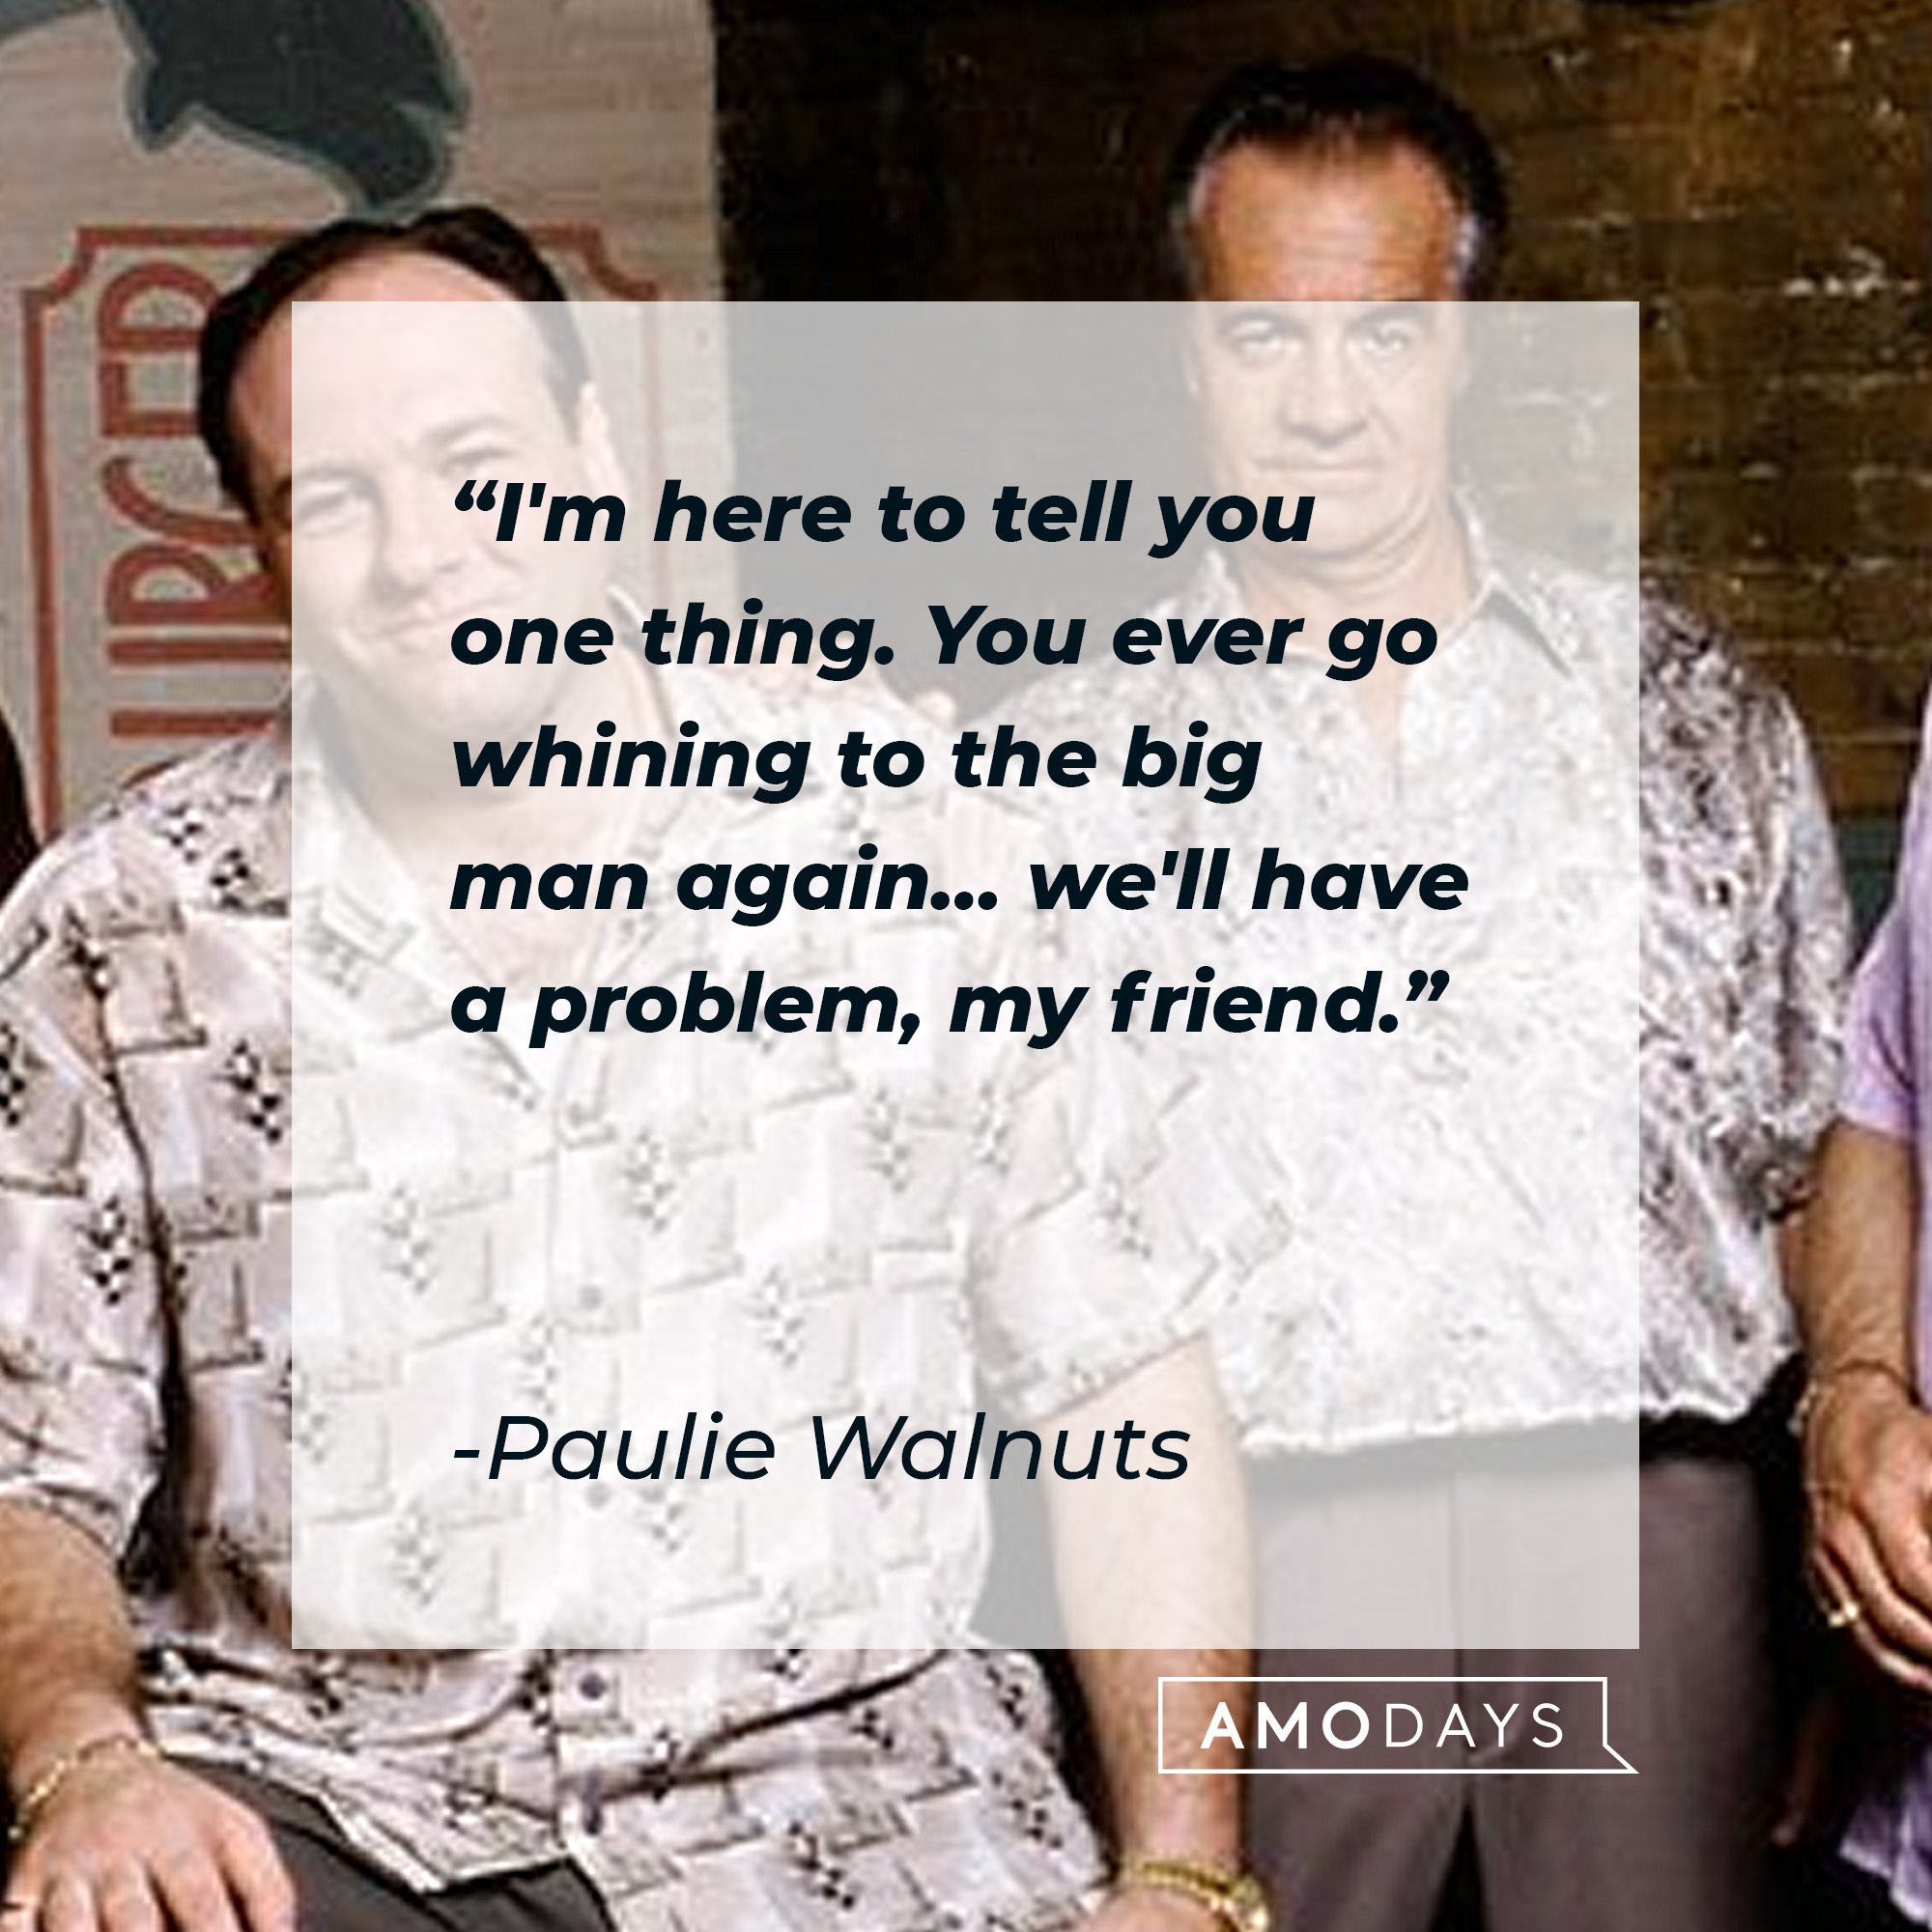 Paulie Walnuts' quote: "I'm here to tell you one thing. You ever go whining to the big man again...we'll have a problem, my friend." | Image: AmoDays 